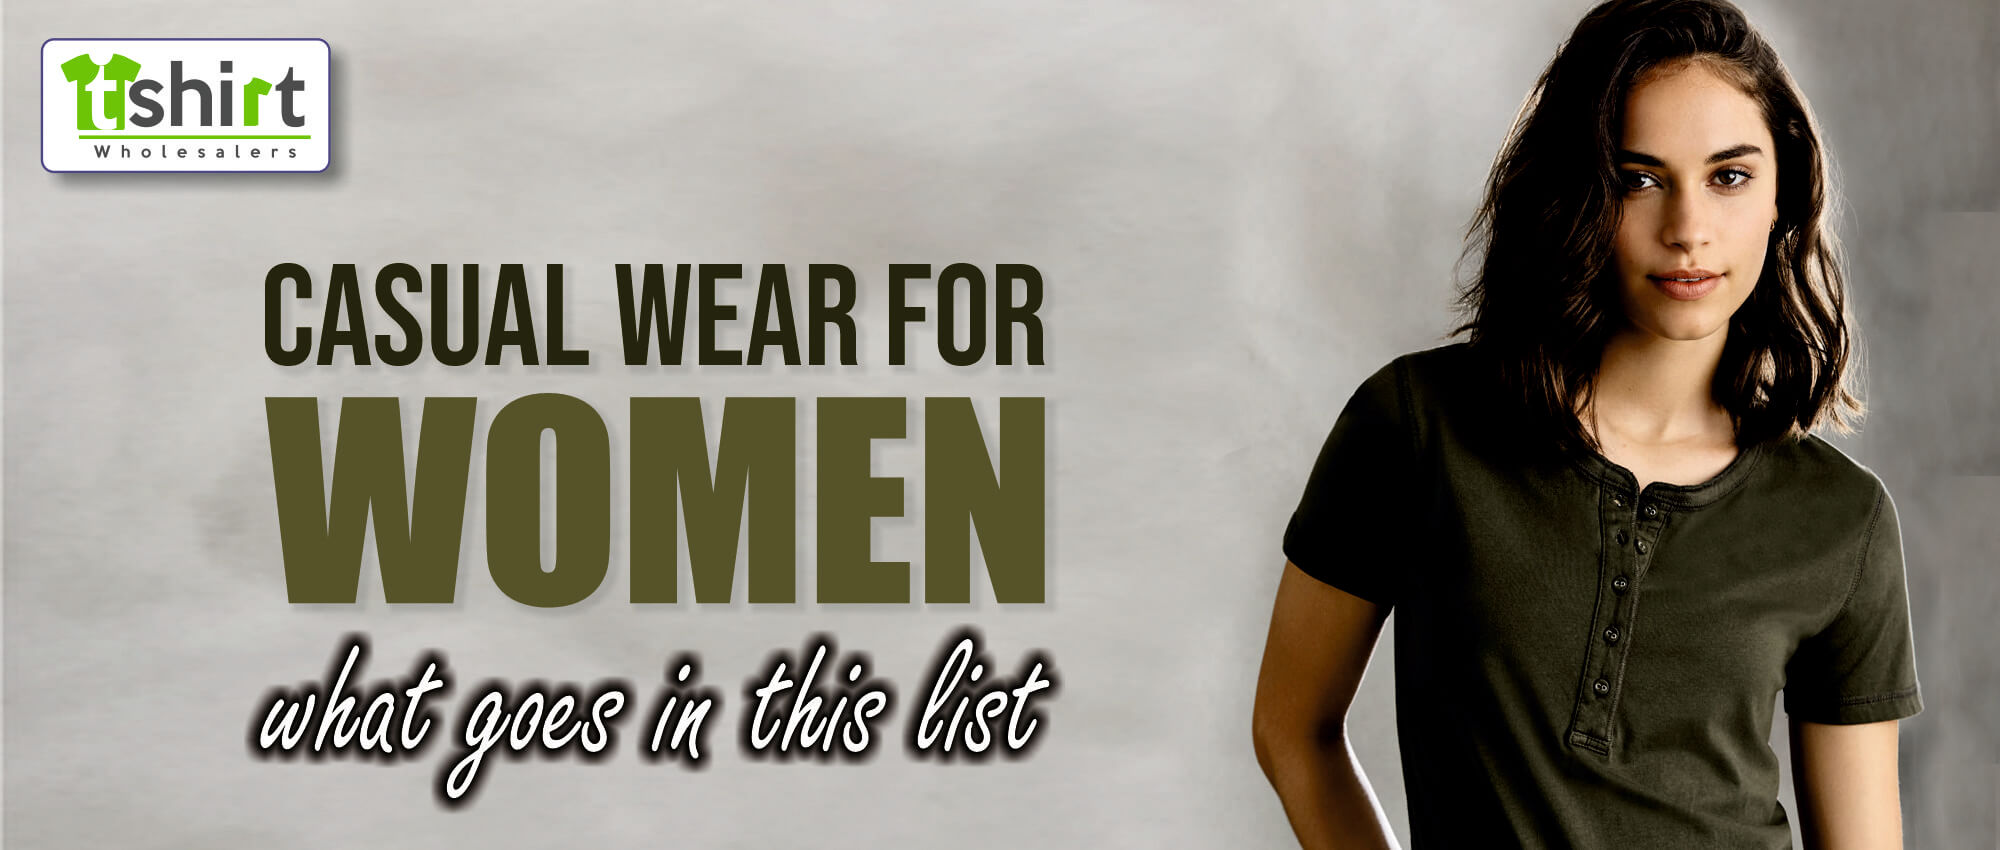 CASUAL WEAR FOR WOMEN – WHAT GOES IN THIS LIST